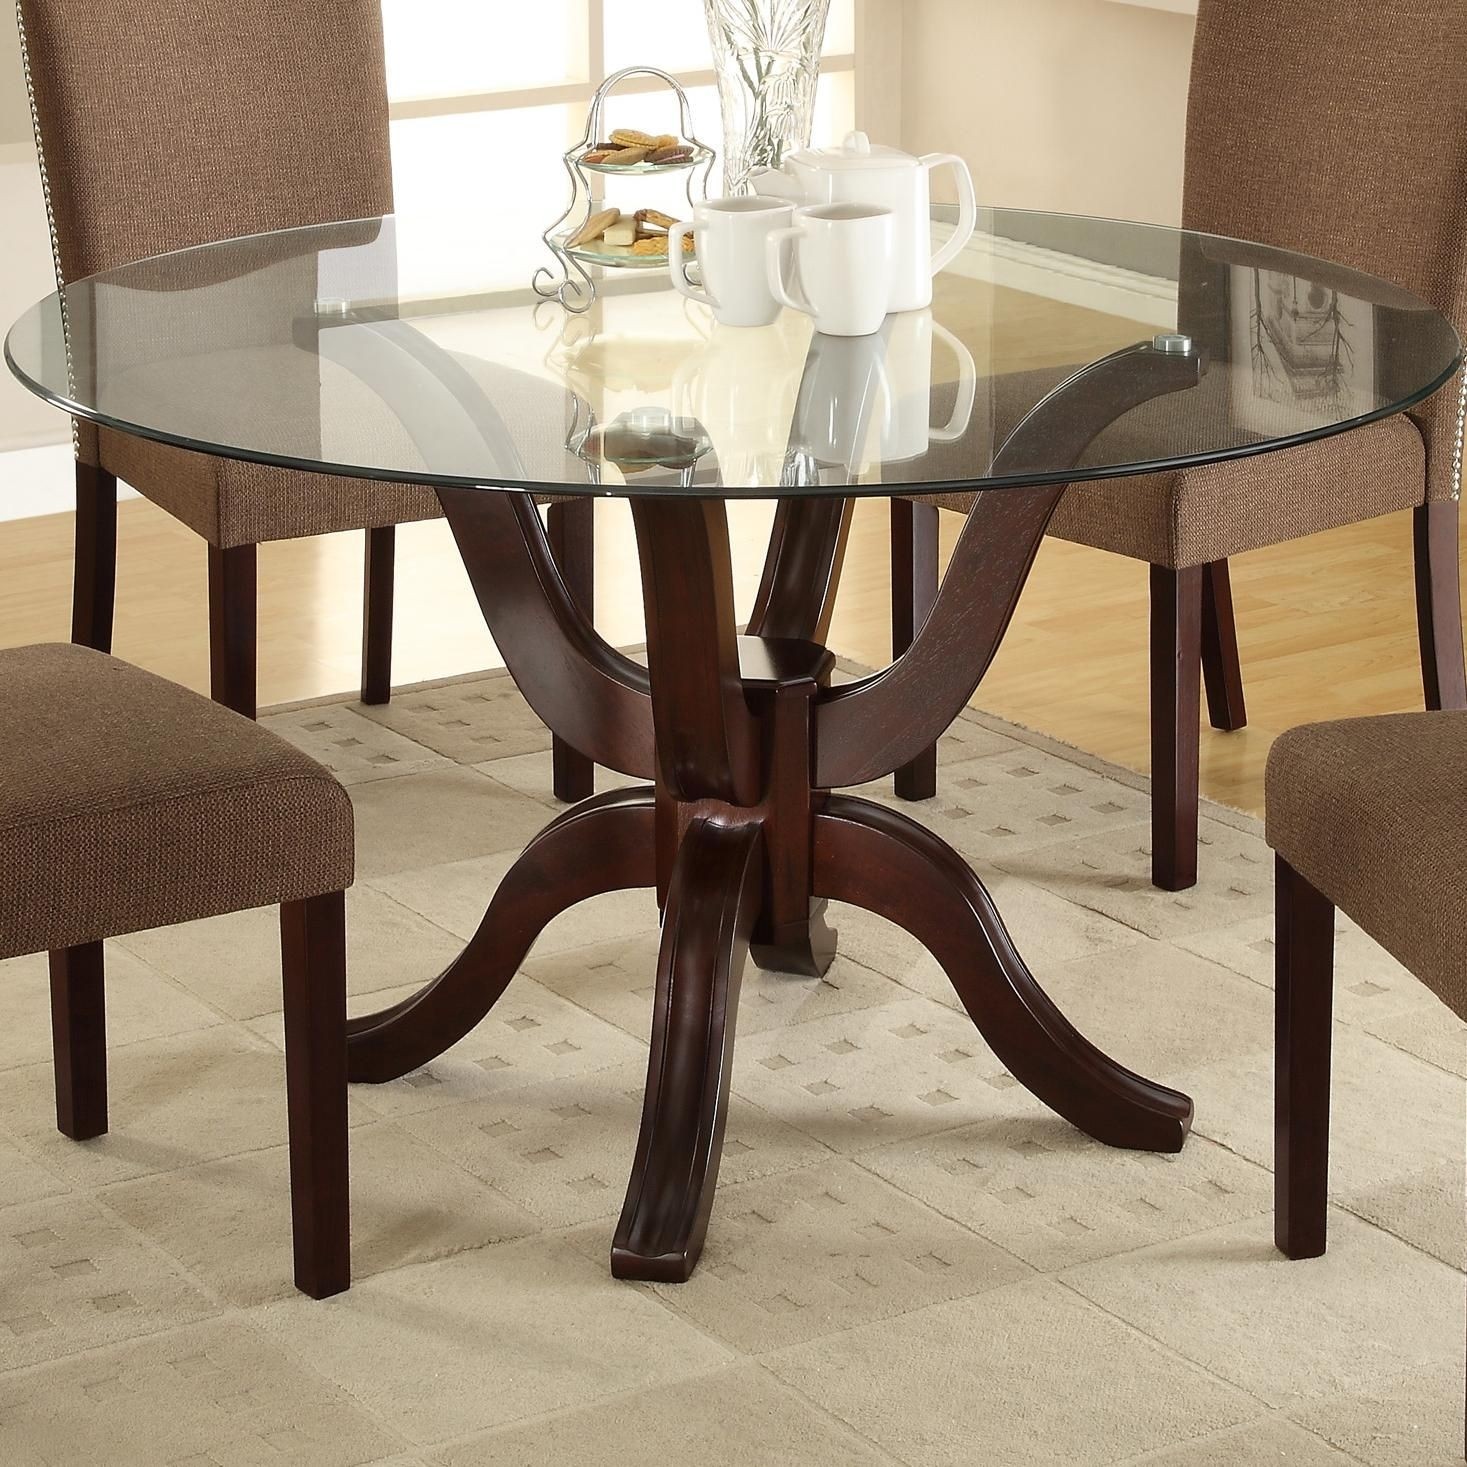 Round Glass Top Dining Table Wood Base Ideas On Foter